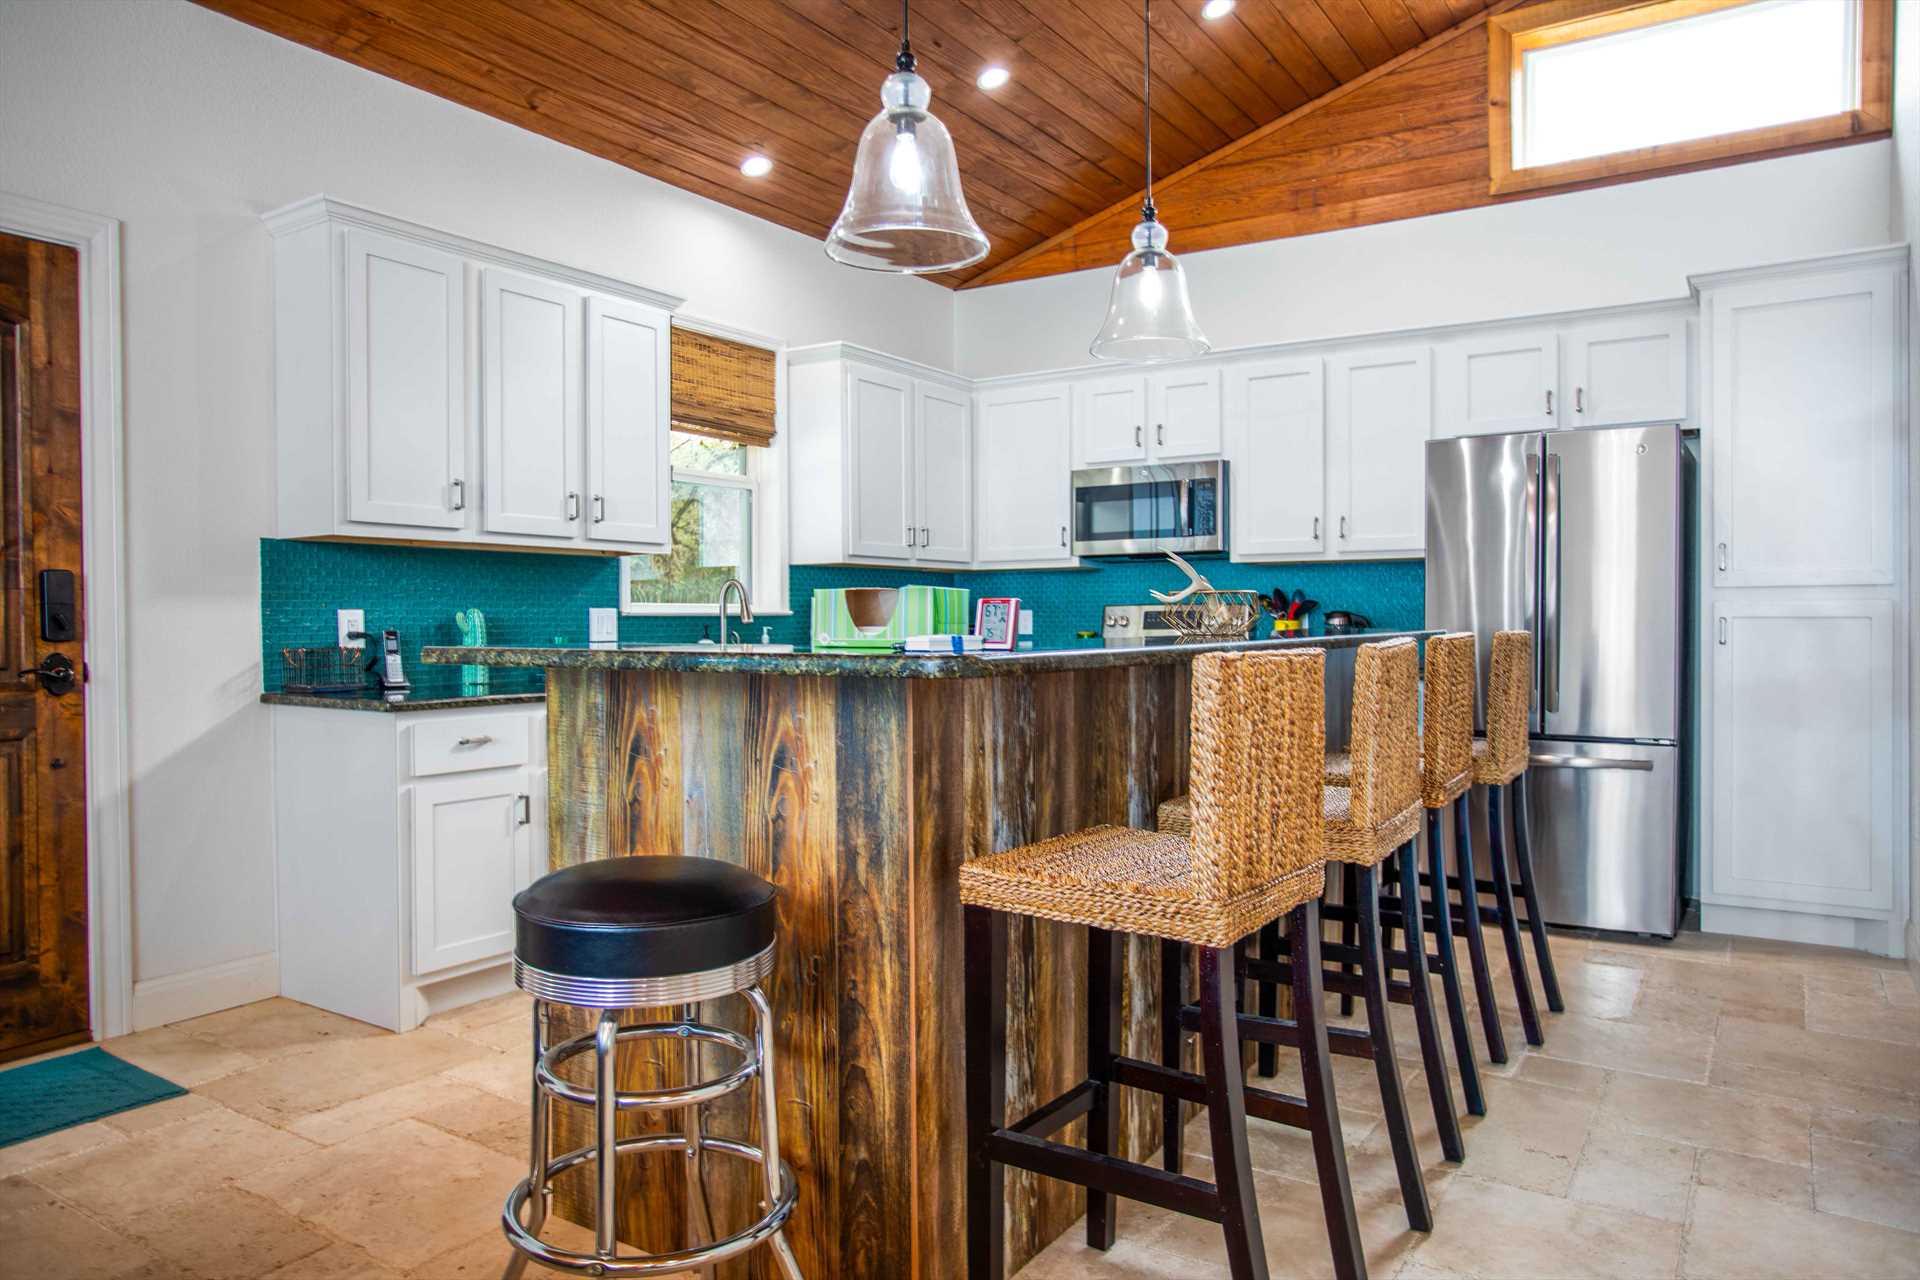                                                 Bar-style seating around the kitchen island provides a casual spot for mealtimes!